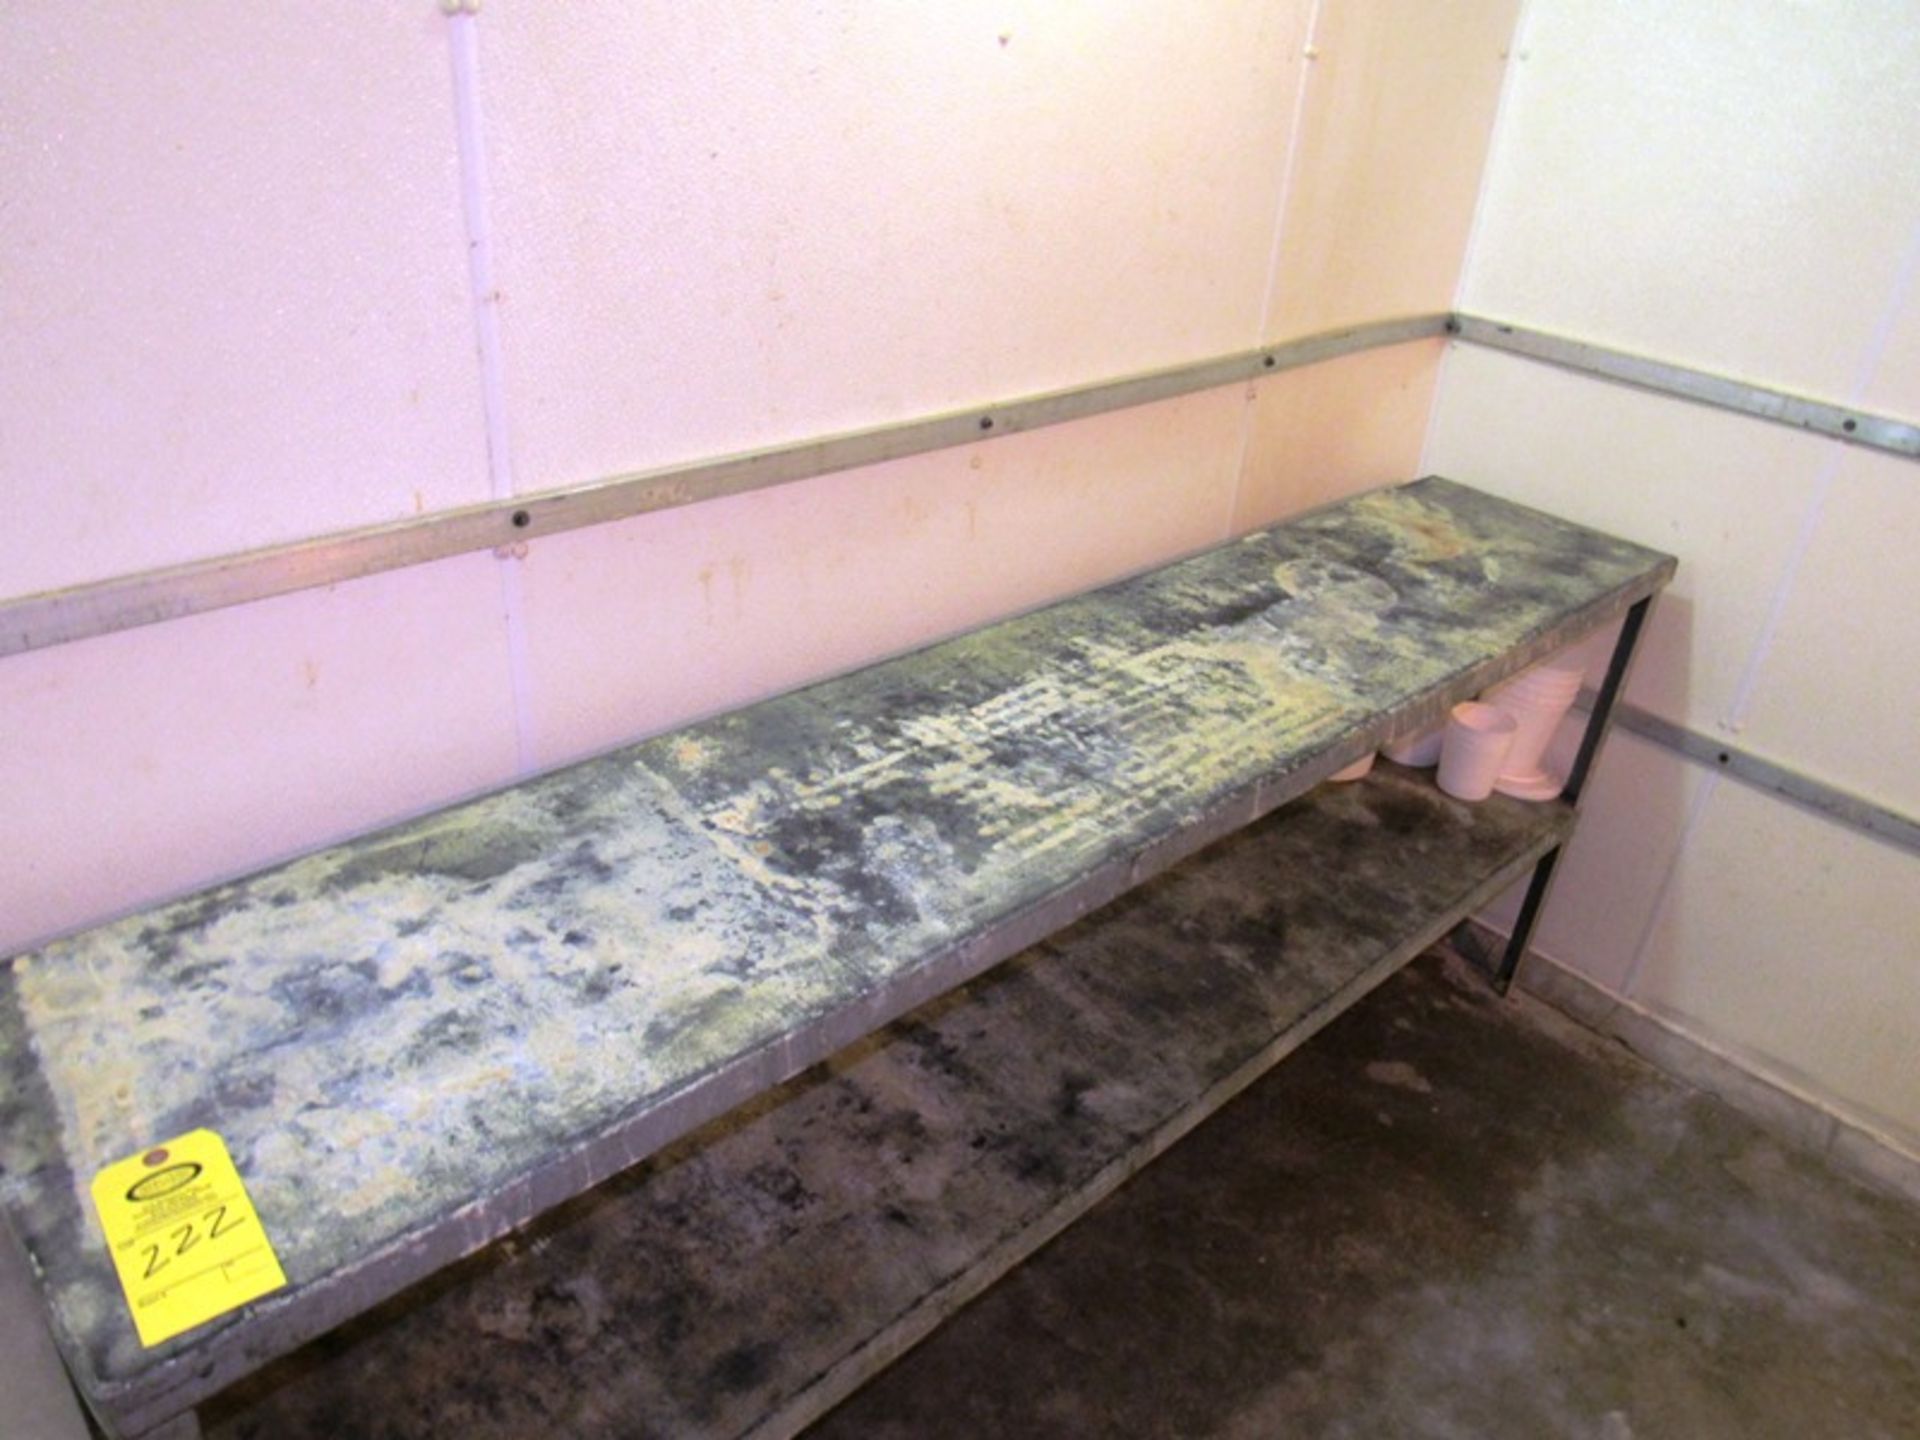 90" X 18" Galvanized Table W/Under Shelf(All Funds Must Be Received by Friday, December 6th, 2019.